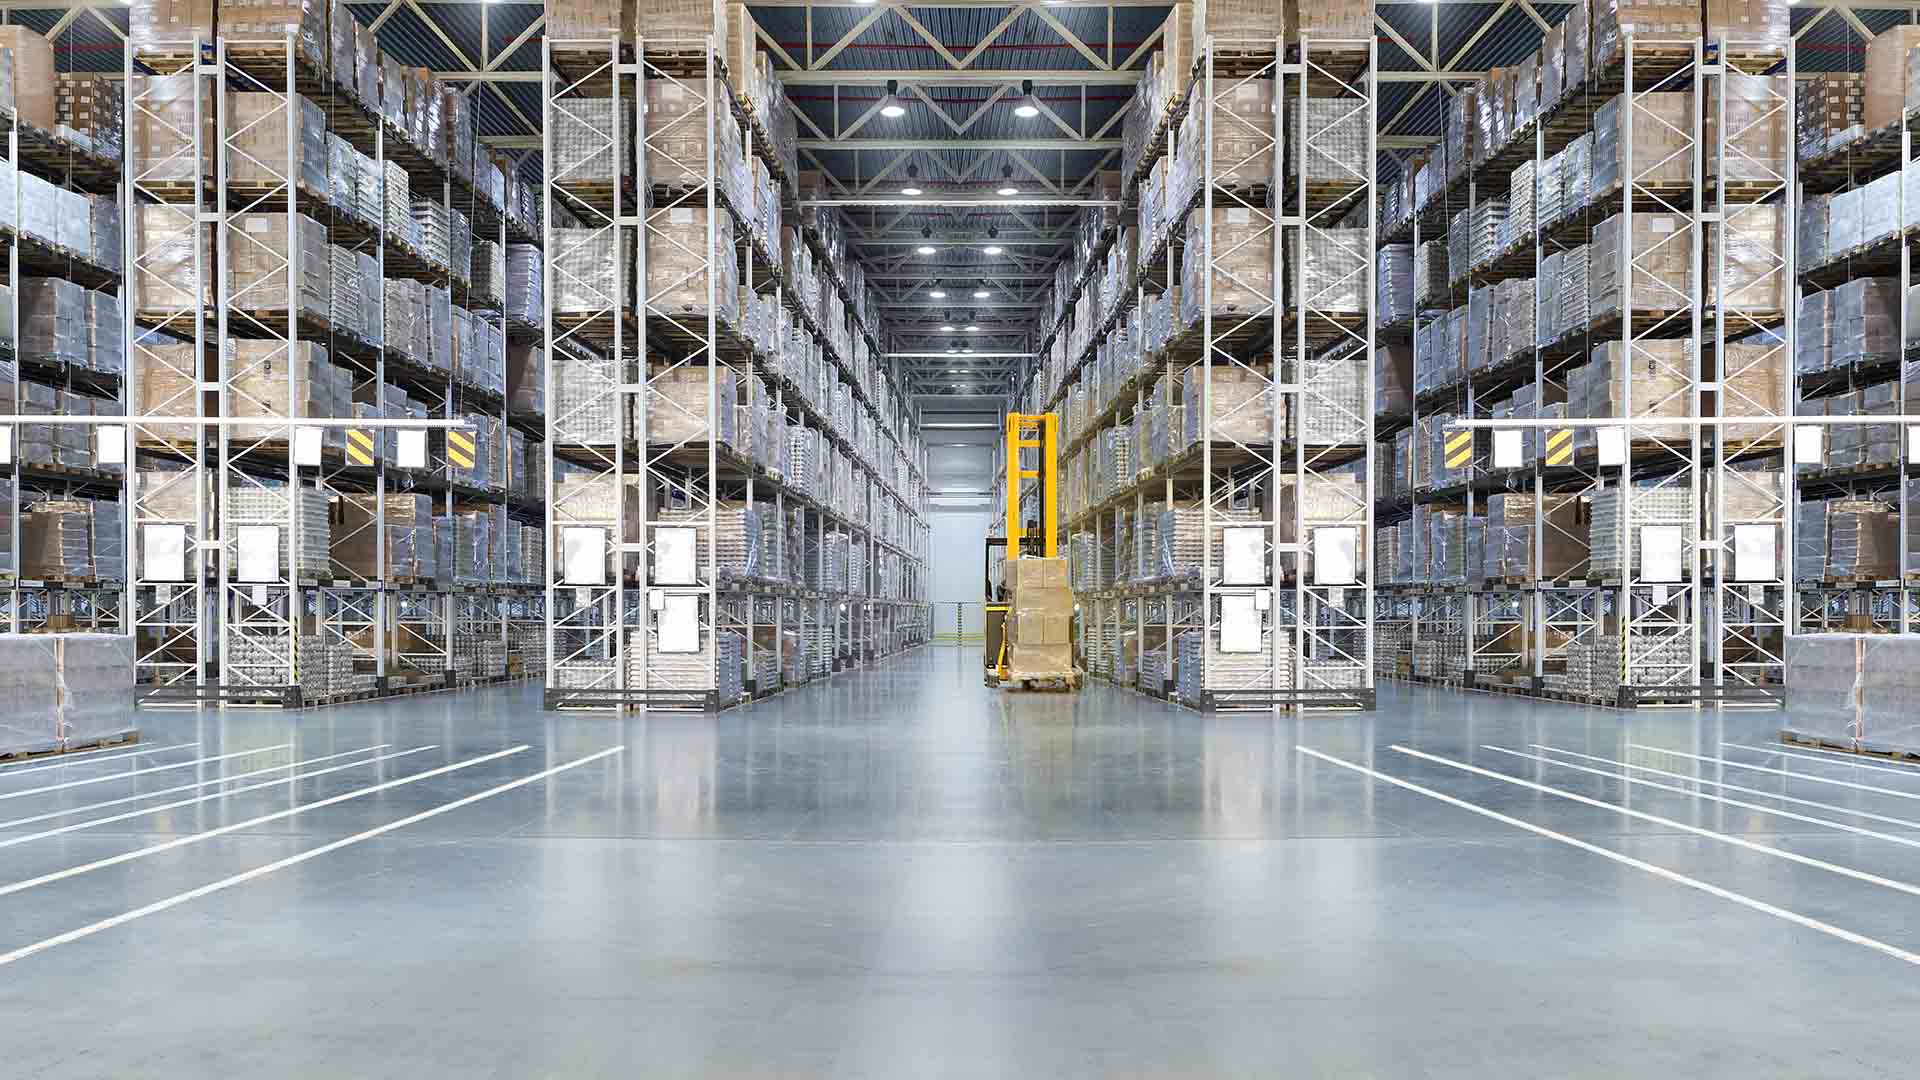 Large warehouse storage with stacked shelves and forklift truck